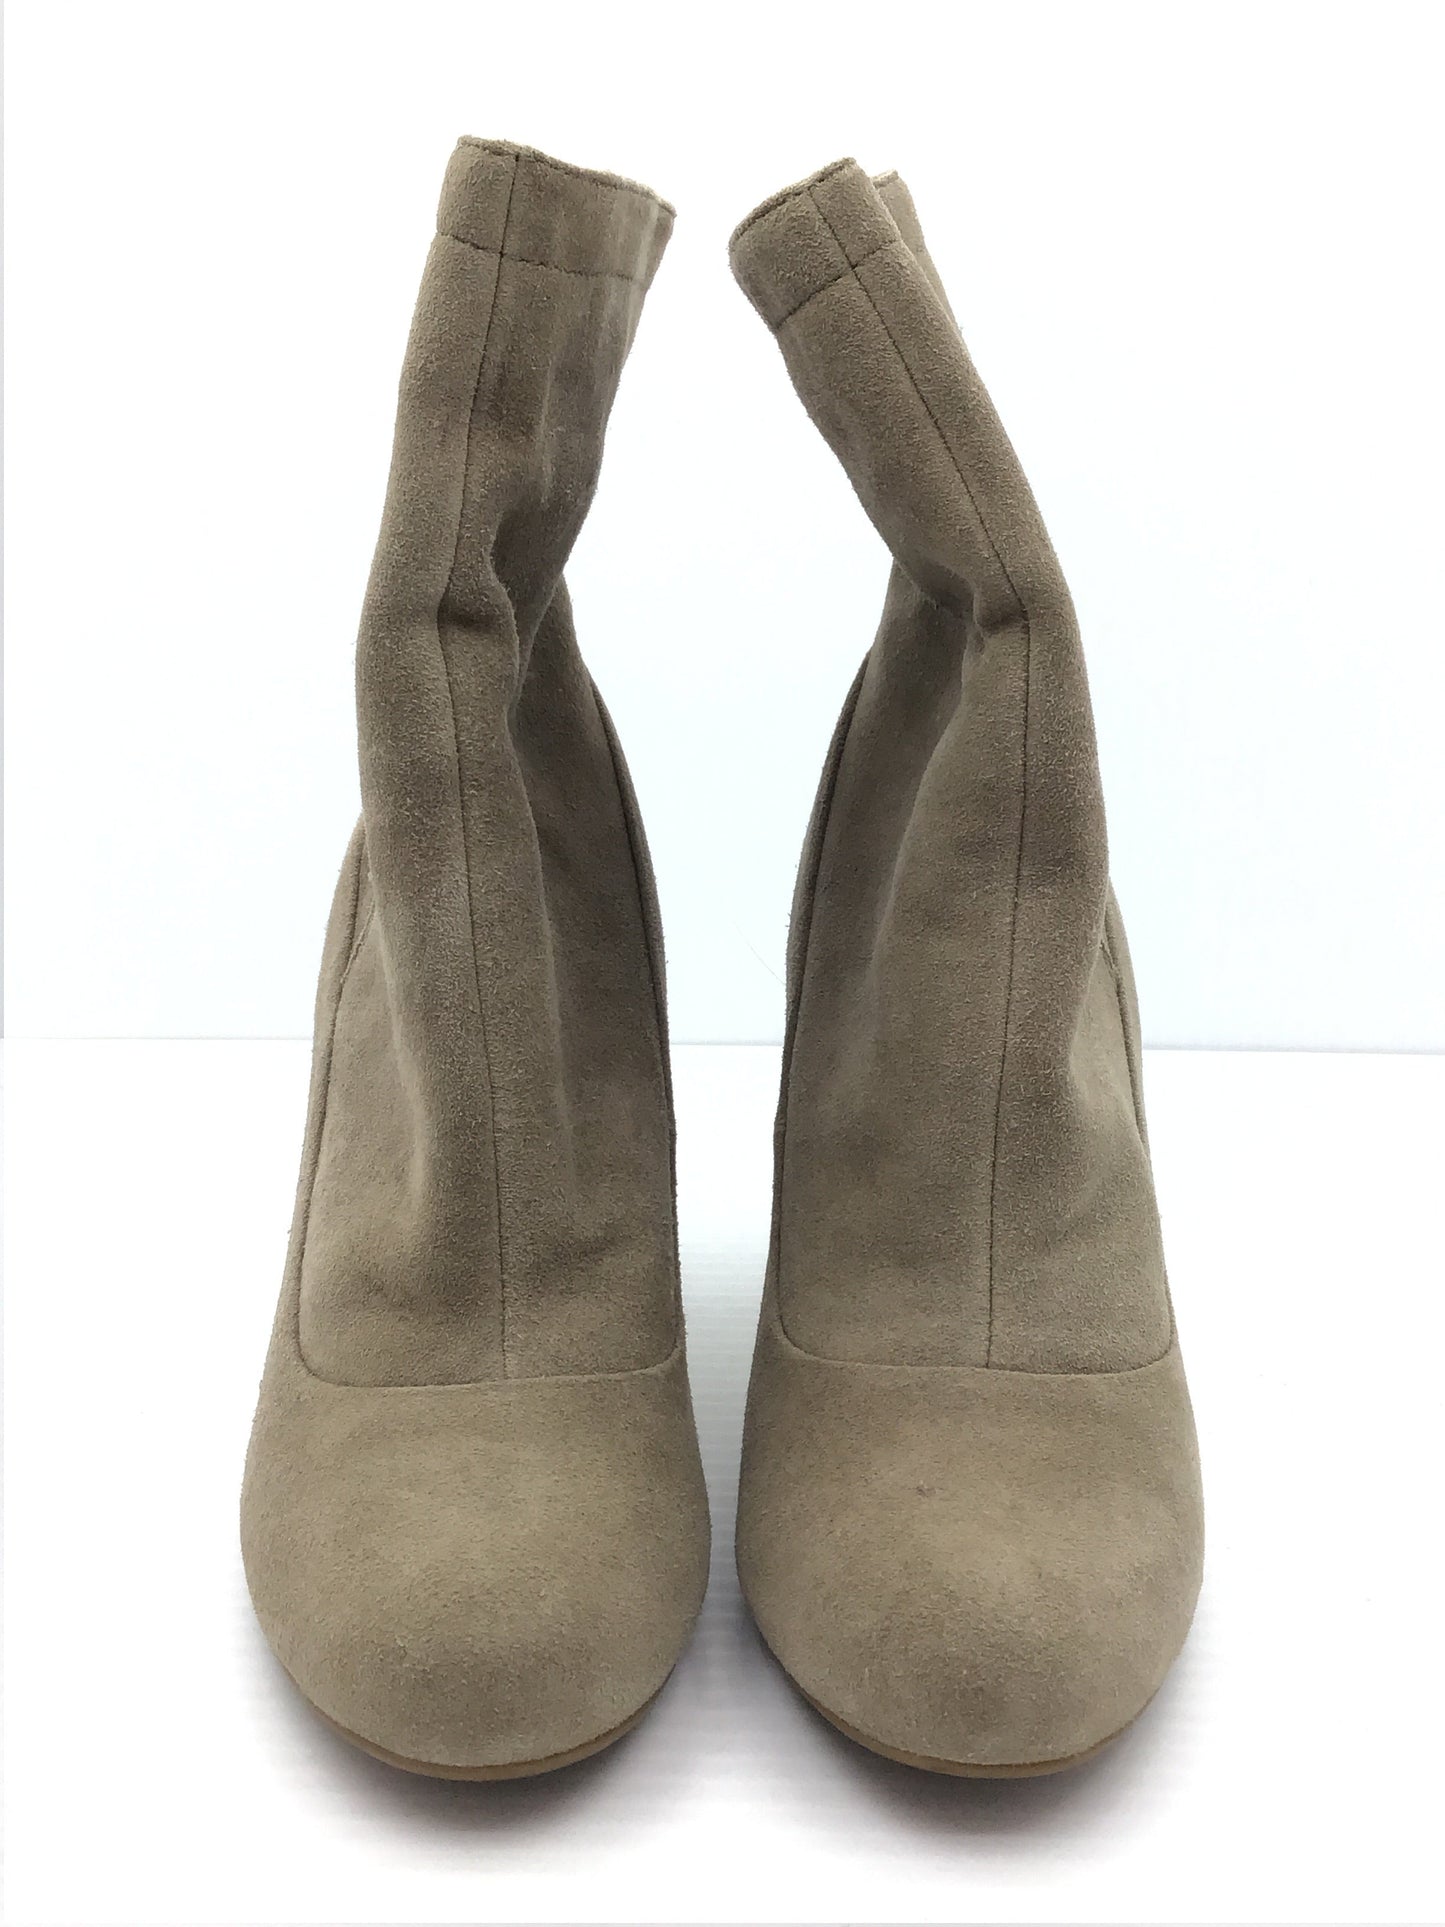 Boots Ankle Heels By Coach  Size: 6